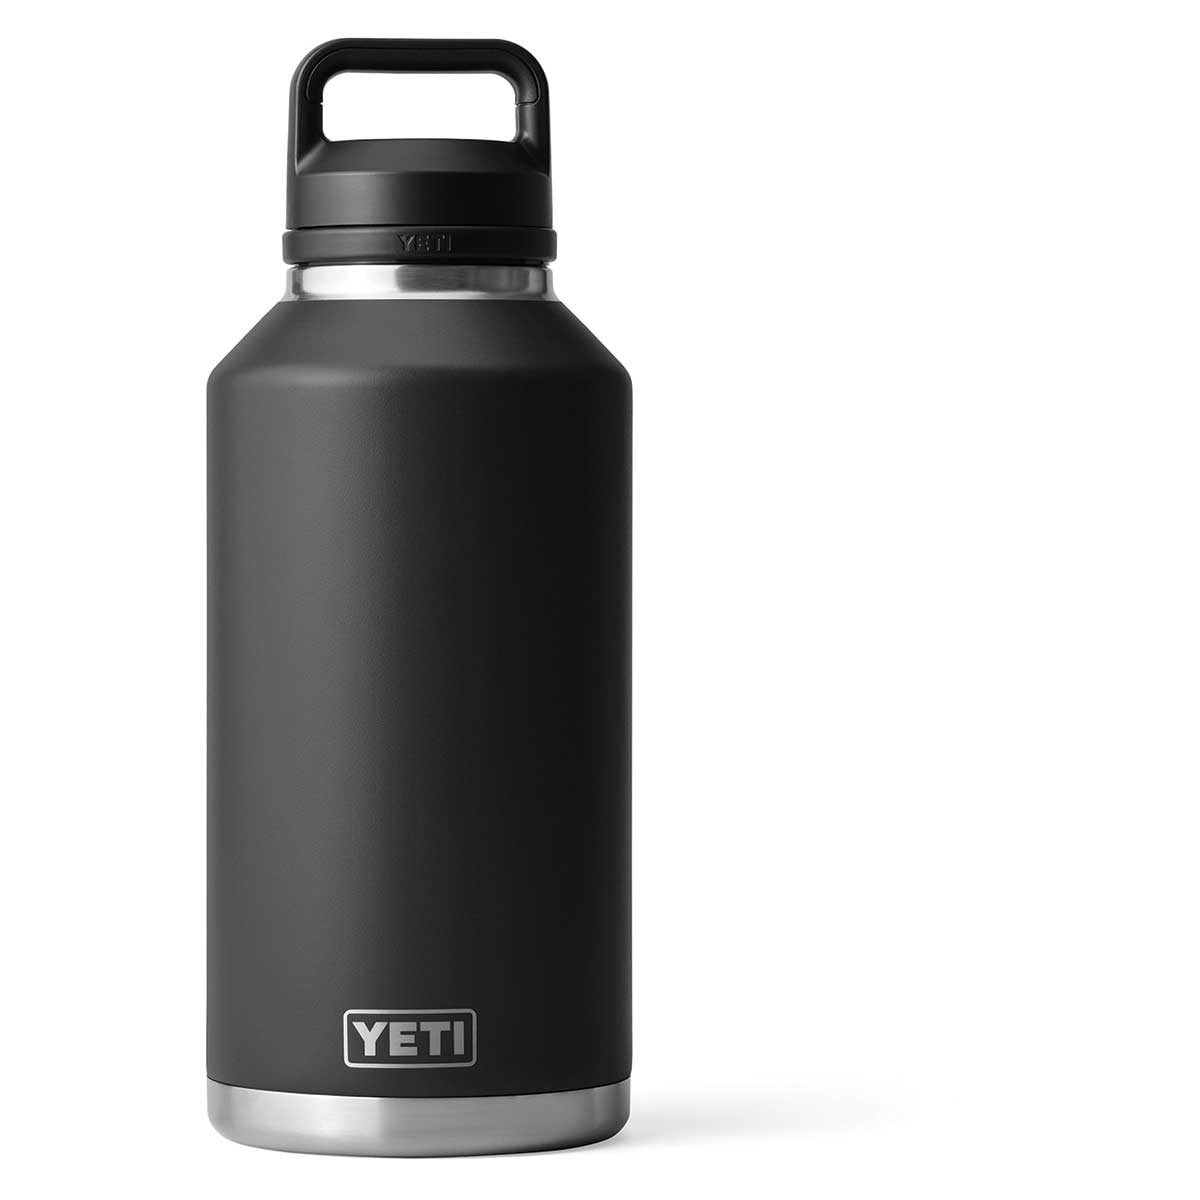 64oz. in all her glory : r/YetiCoolers